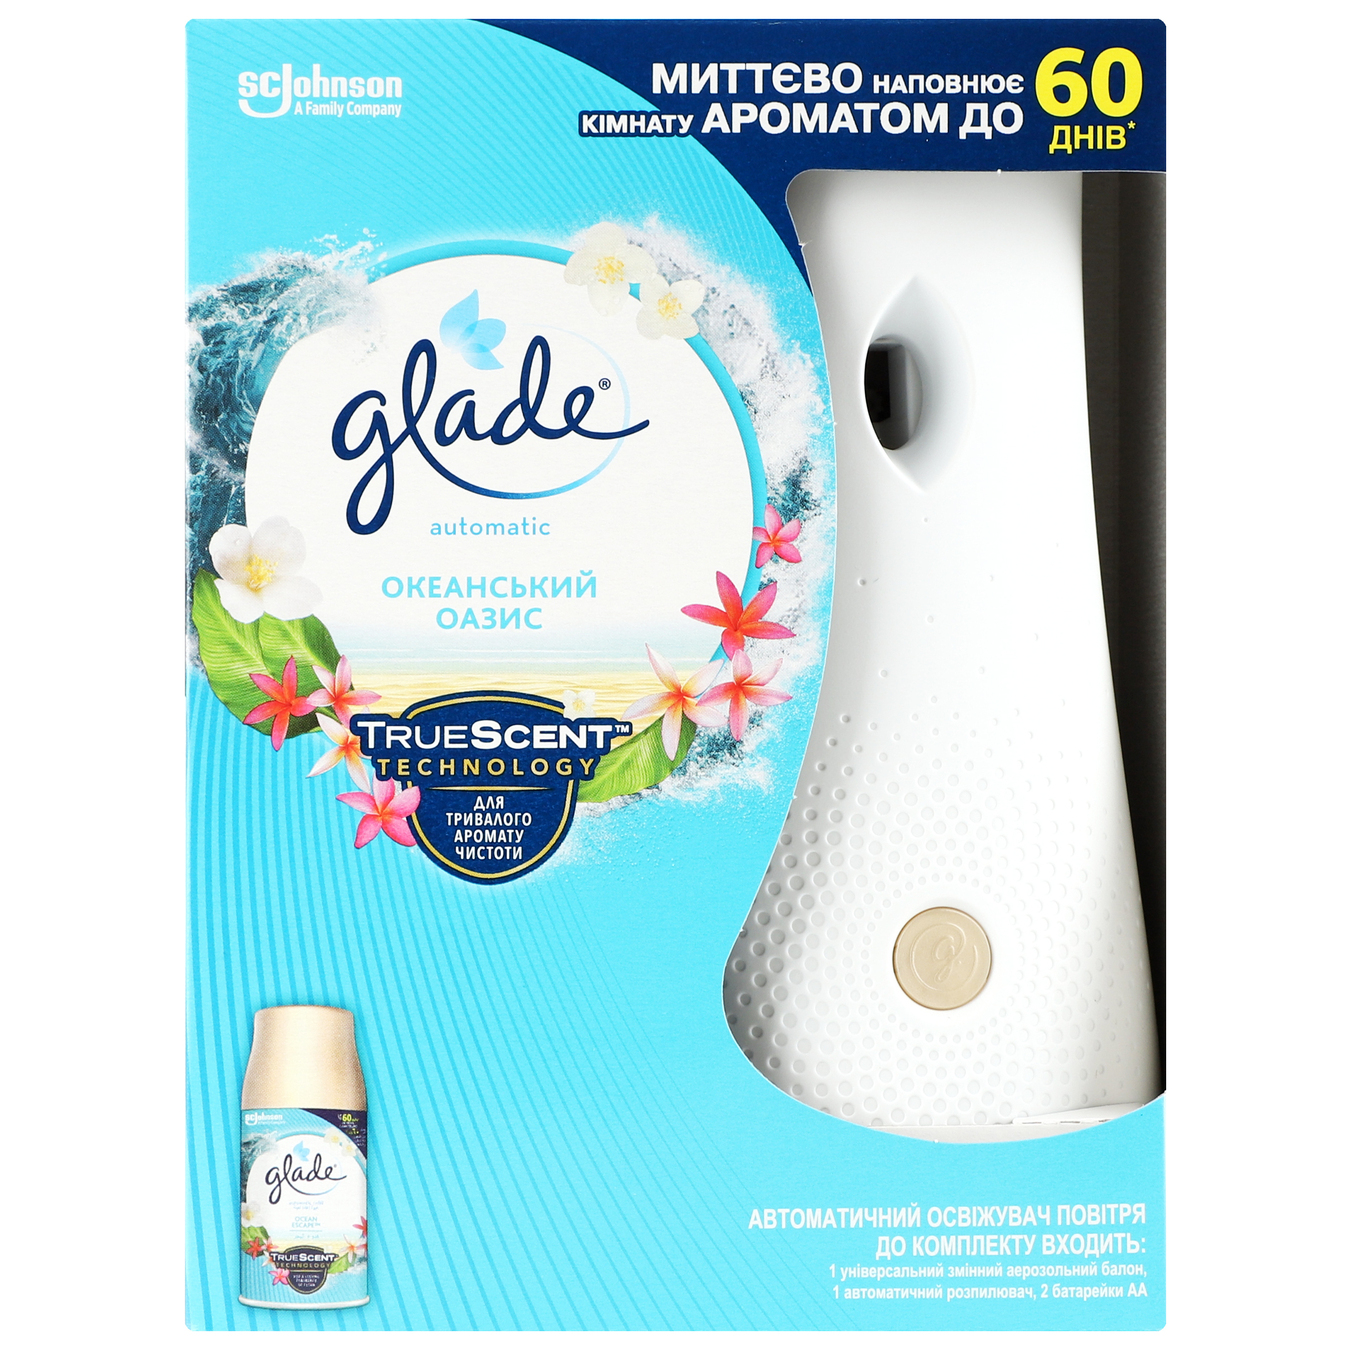 Air freshener Glade Ocean Oasis automatic 1 pc